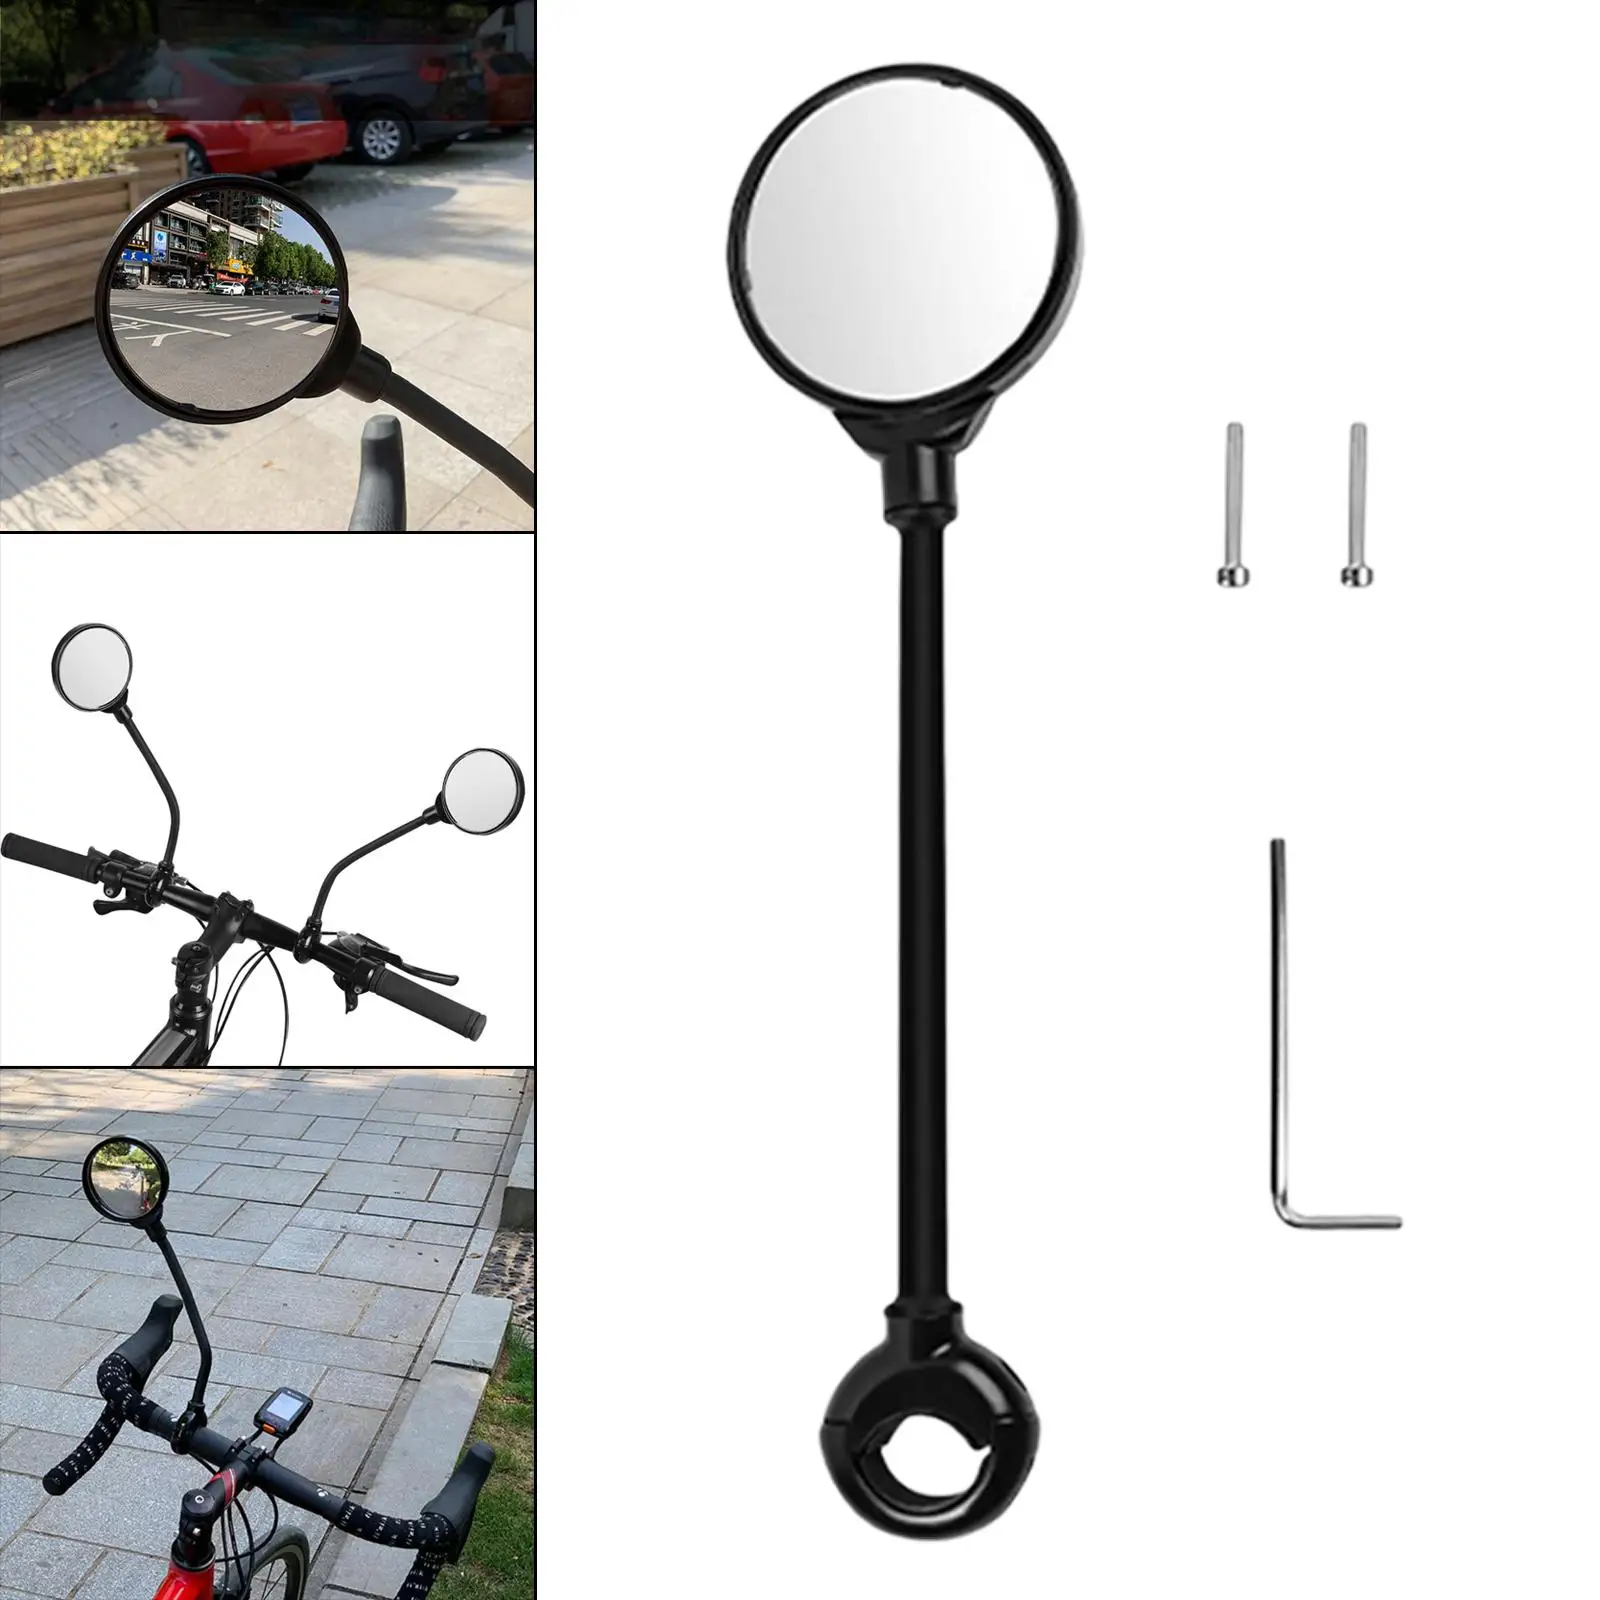 Flexible Bicycle Rear View Mirror 360 Rotatable Adjustable Left Right